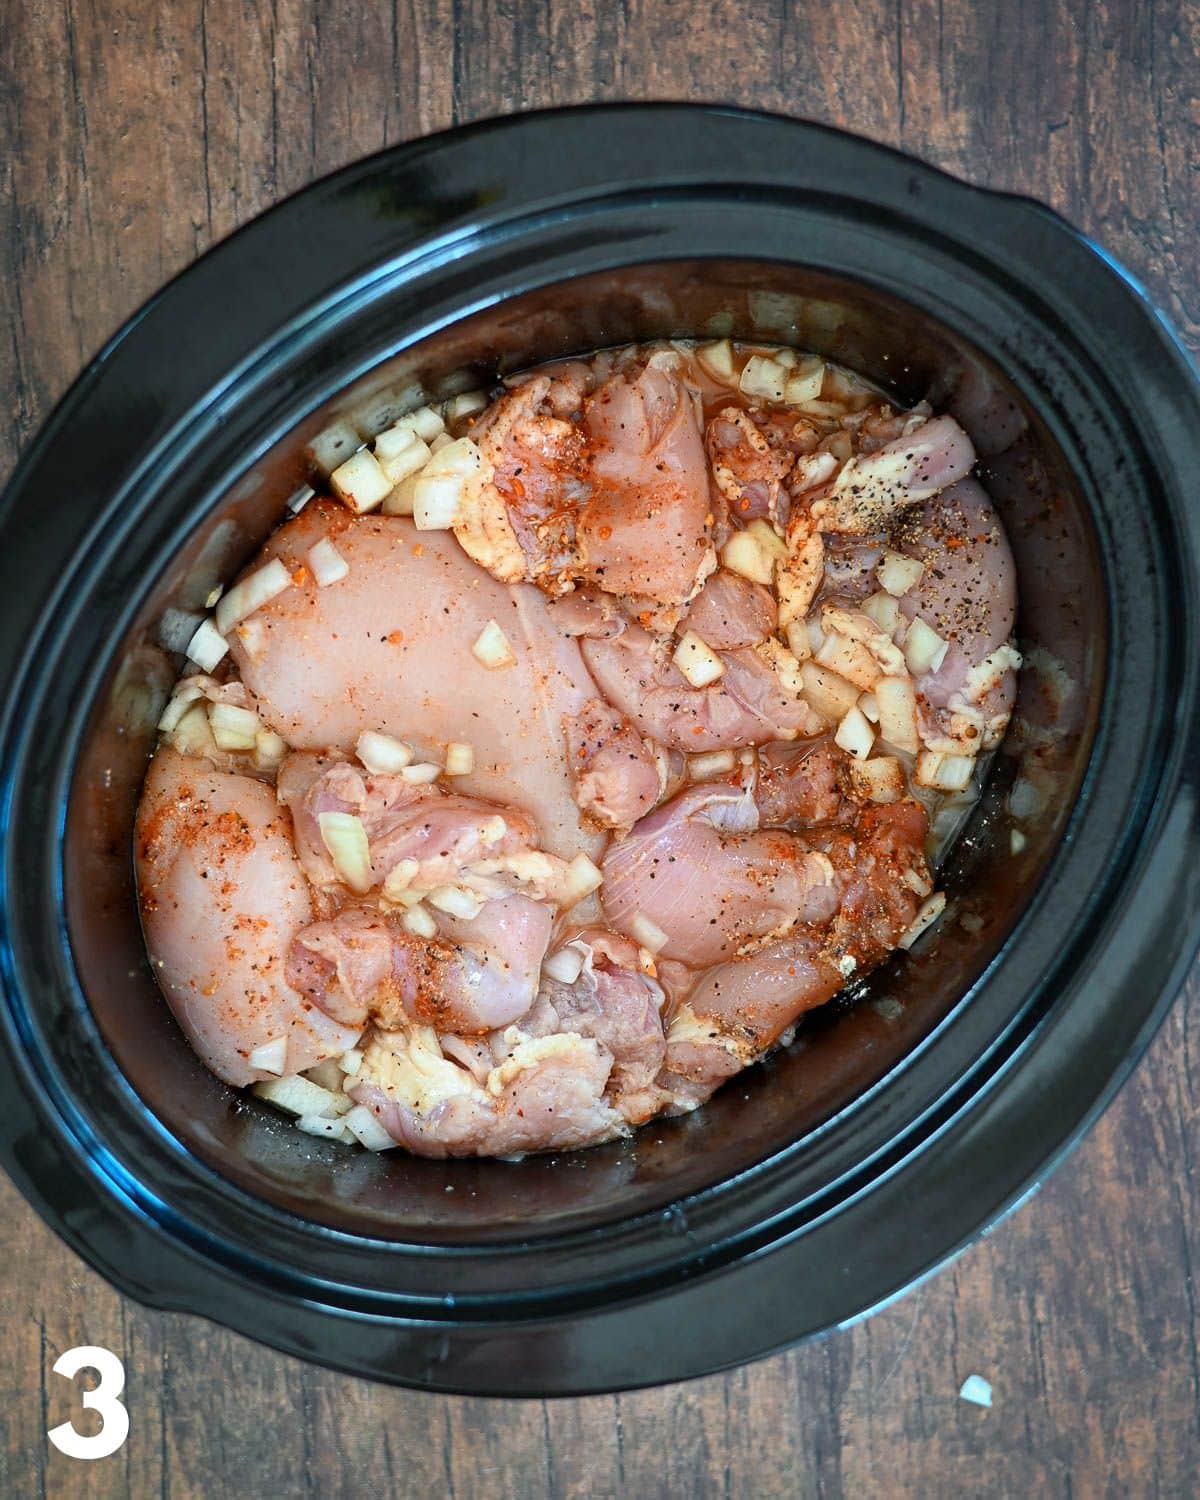 Onion, raw chicken, and spices in a crock pot.